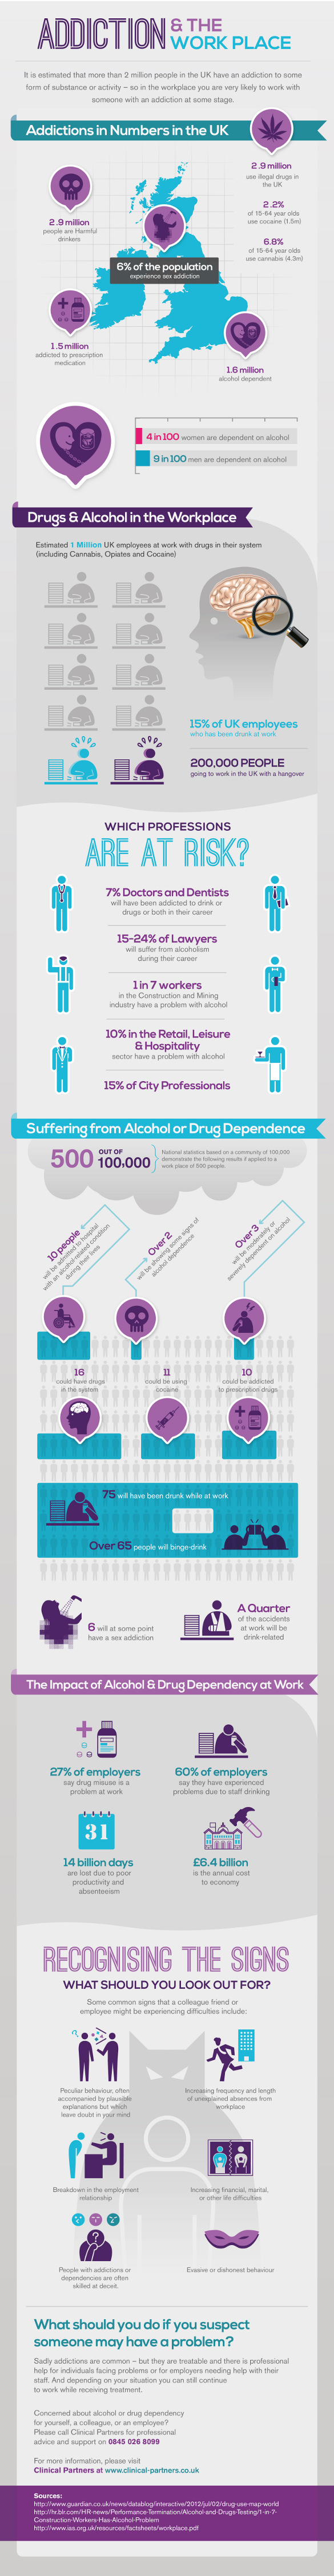 Addiction and the Workplace Infographic